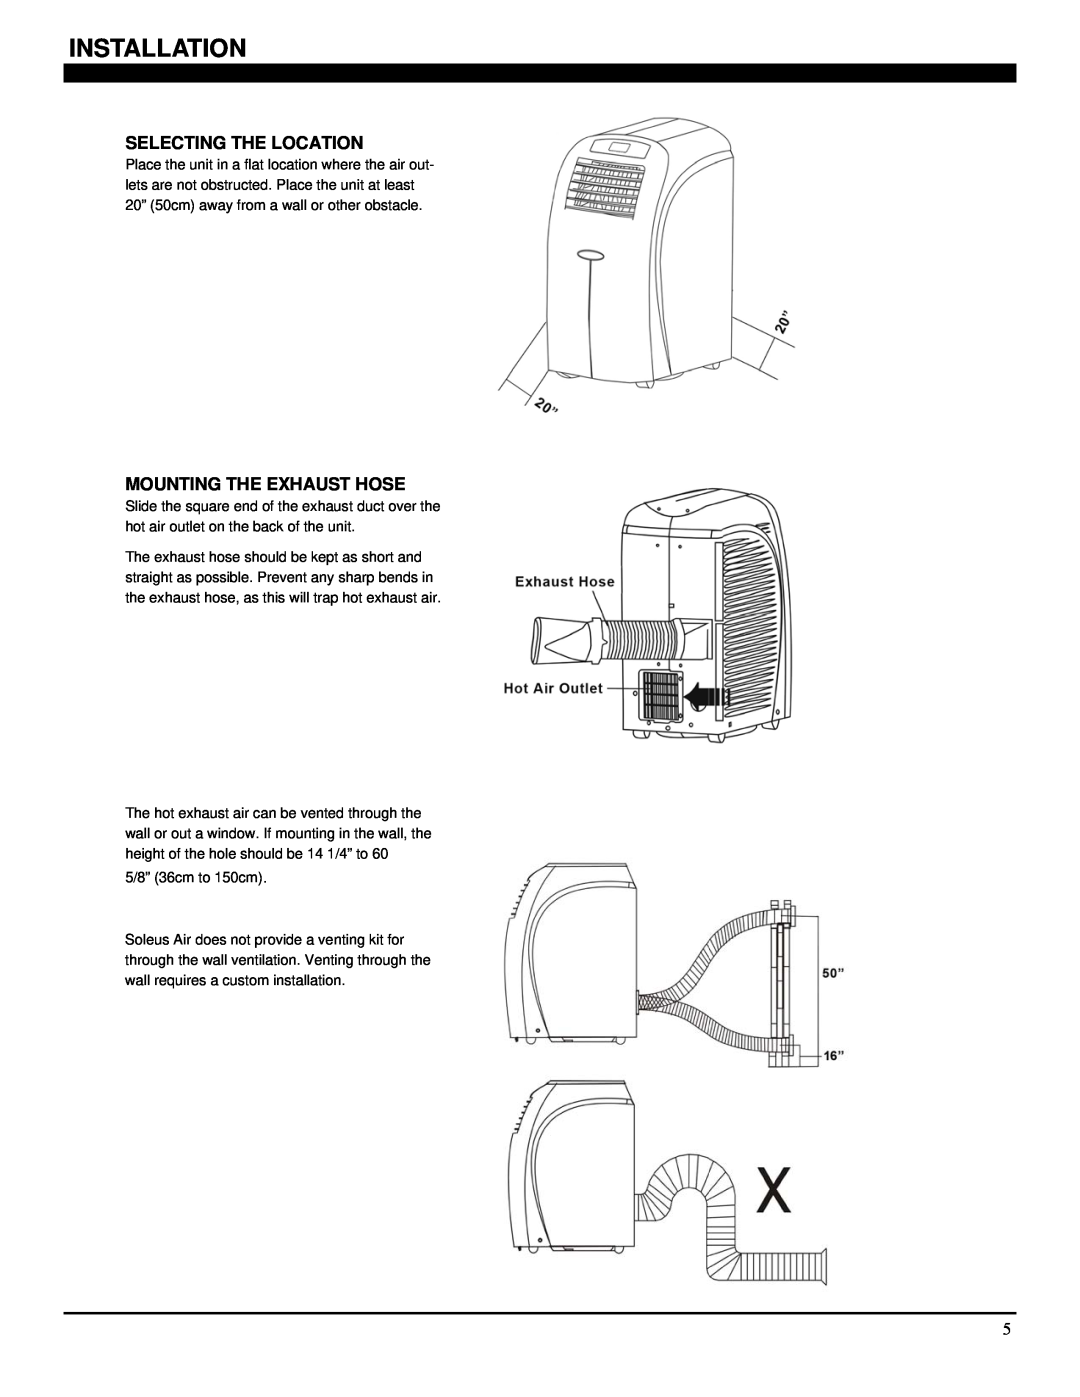 Soleus Air PE7-10R-03 operating instructions Installation, Selecting The Location, Mounting The Exhaust Hose 